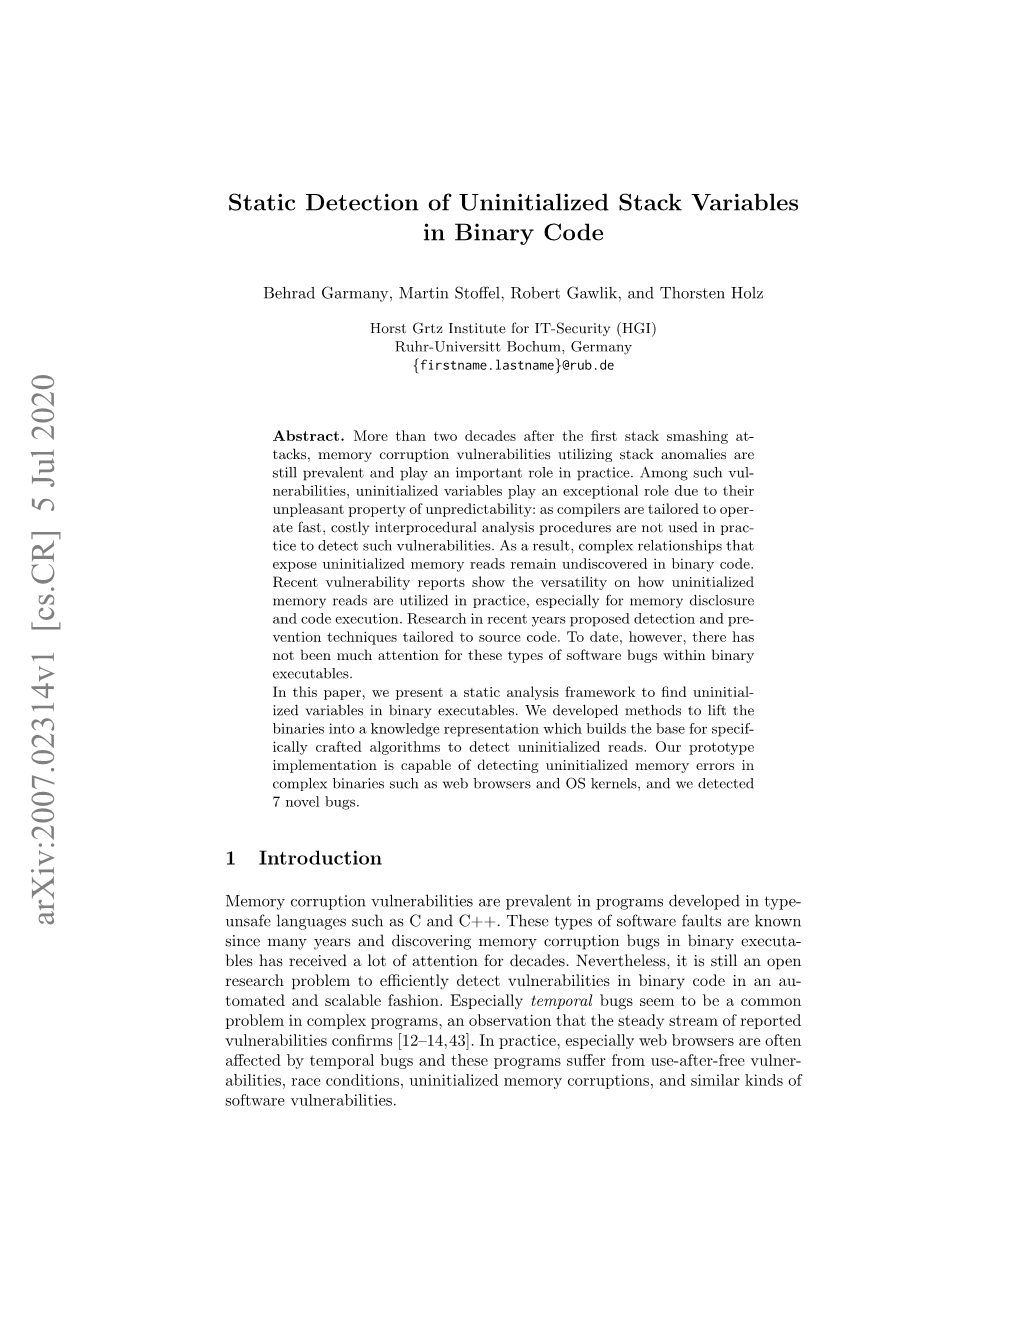 Static Detection of Uninitialized Stack Variables in Binary Code